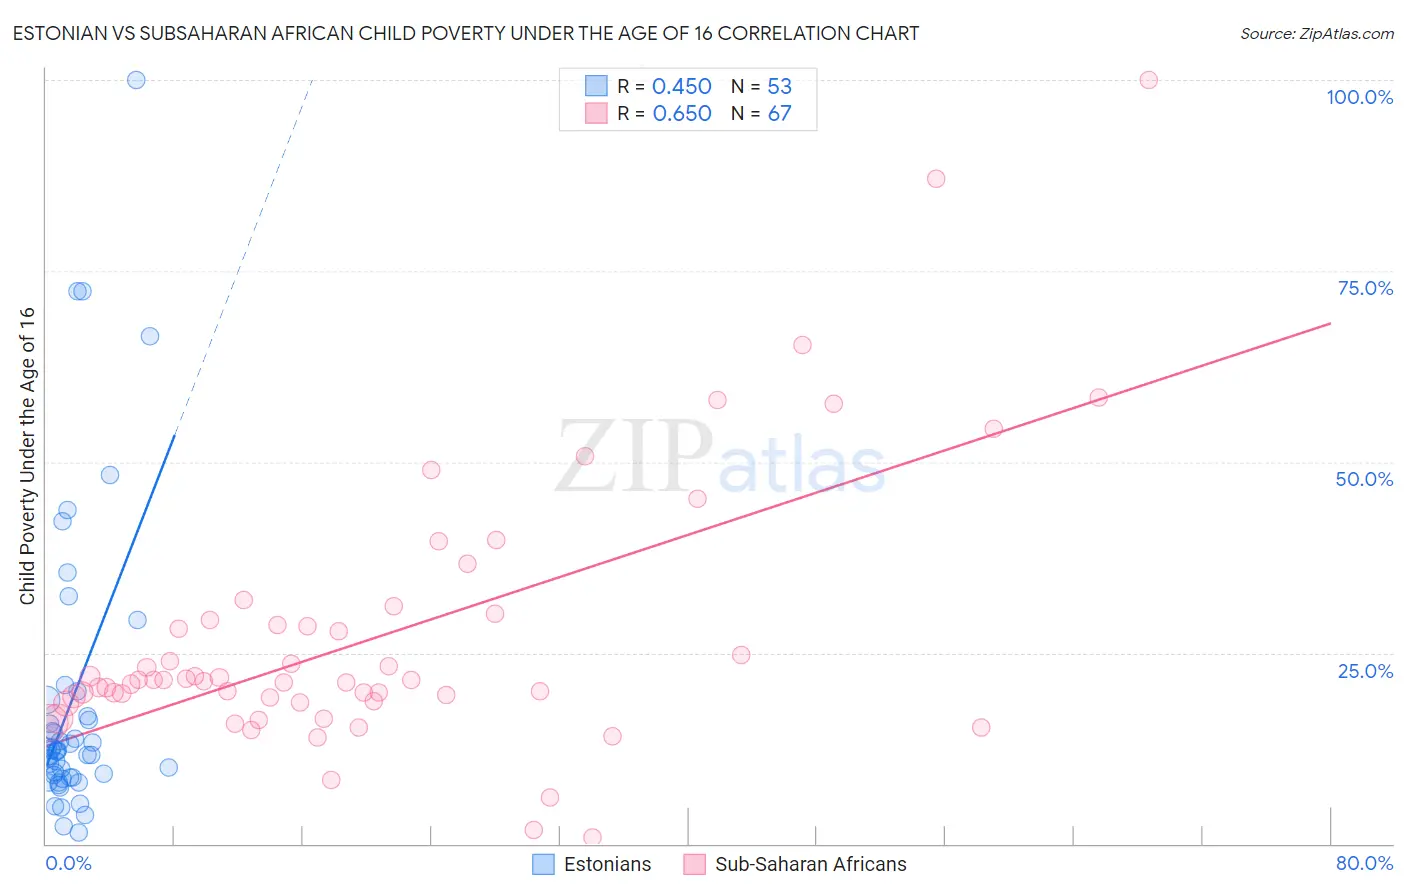 Estonian vs Subsaharan African Child Poverty Under the Age of 16